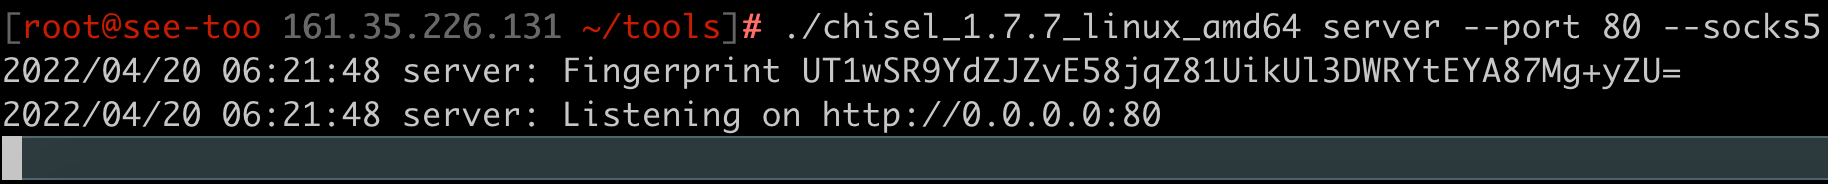 Starting the Chisel server on my VPS